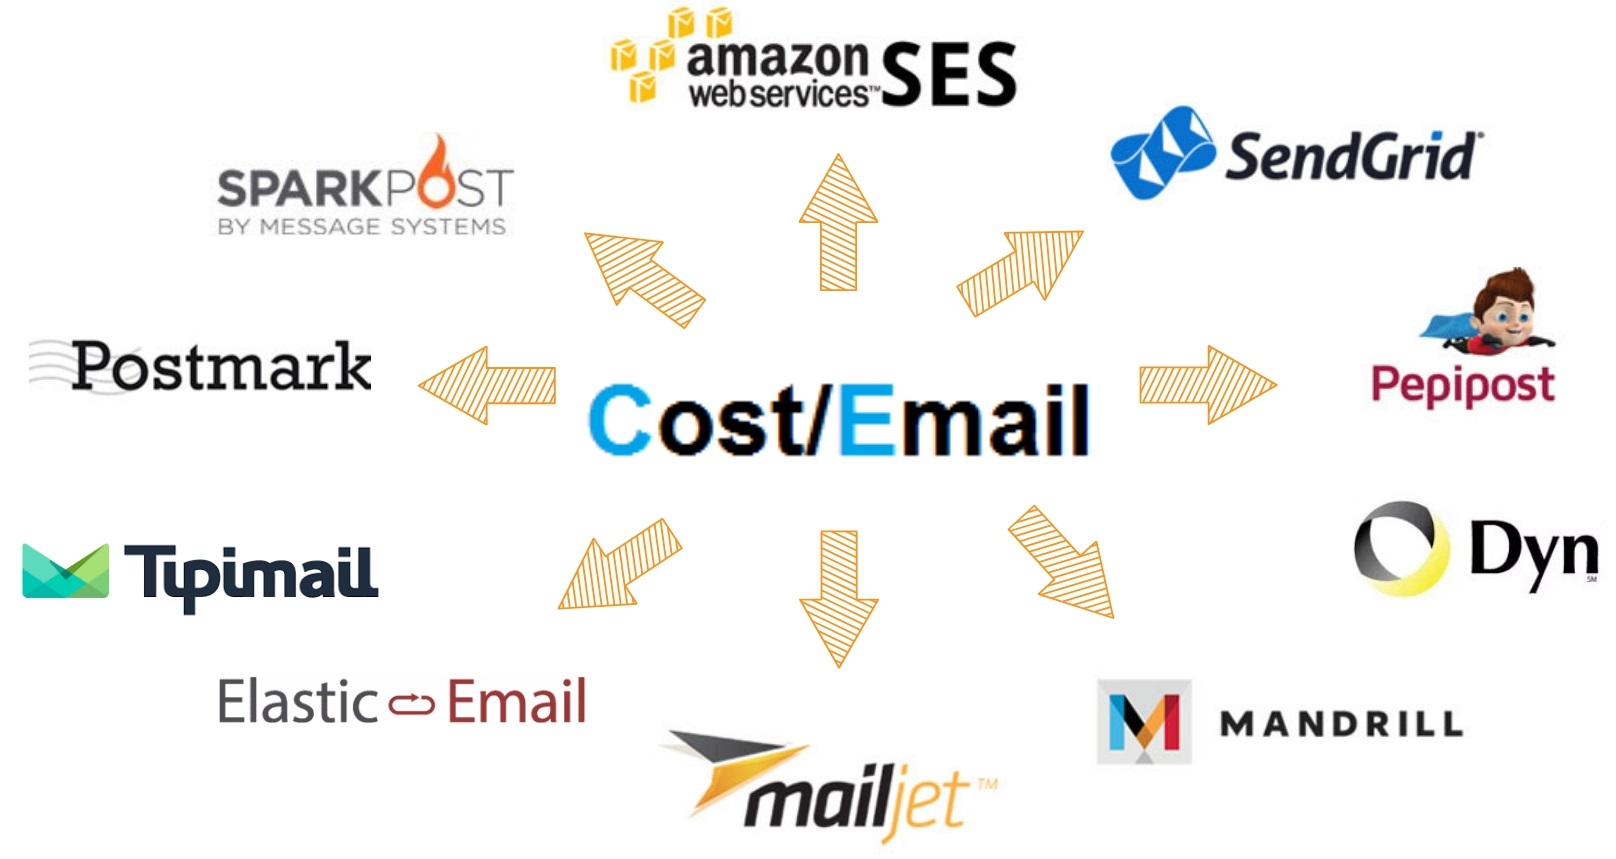 Are you looking for the best SMTP service to ensure the delivery of your emails? Look no further! We've compared the top SMTP providers based on features, pricing, and more to help you find the perfect fit for your needs. From cost-effective options like Amazon SES to feature-rich platforms like Mailgun, we've got you covered.